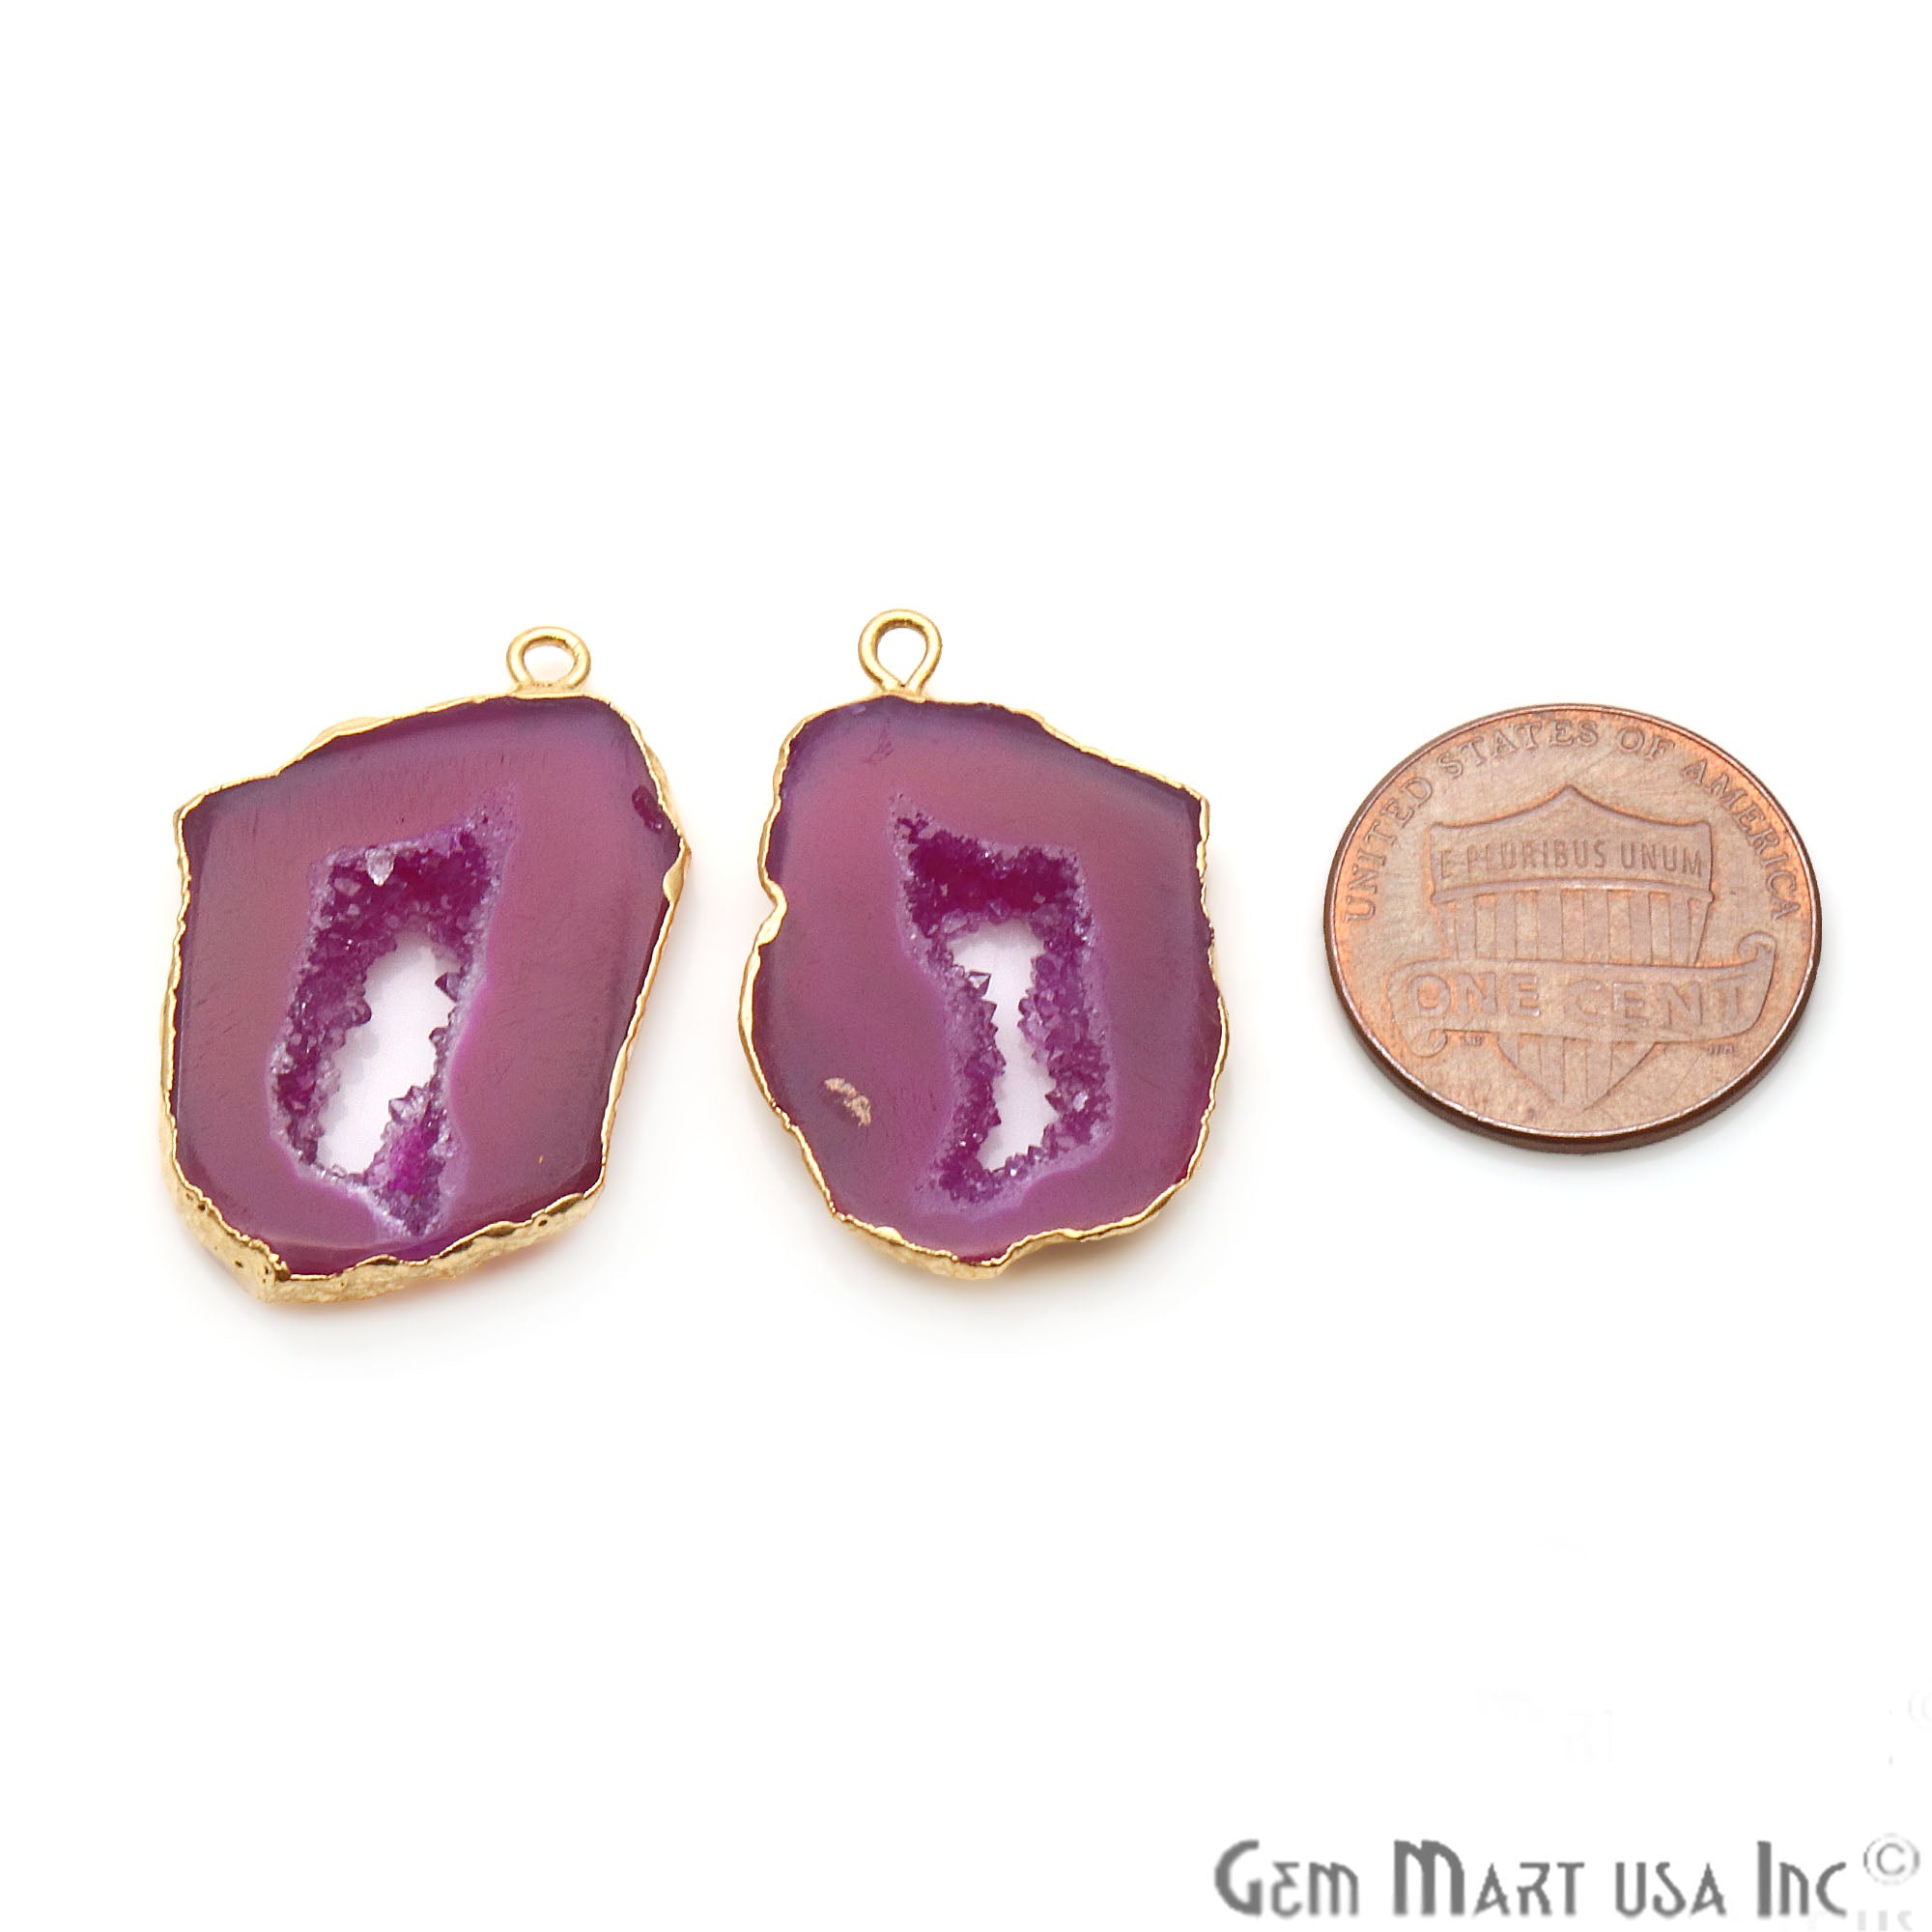 Agate Slice 30x18mm Organic Gold Electroplated Gemstone Earring Connector 1 Pair - GemMartUSA